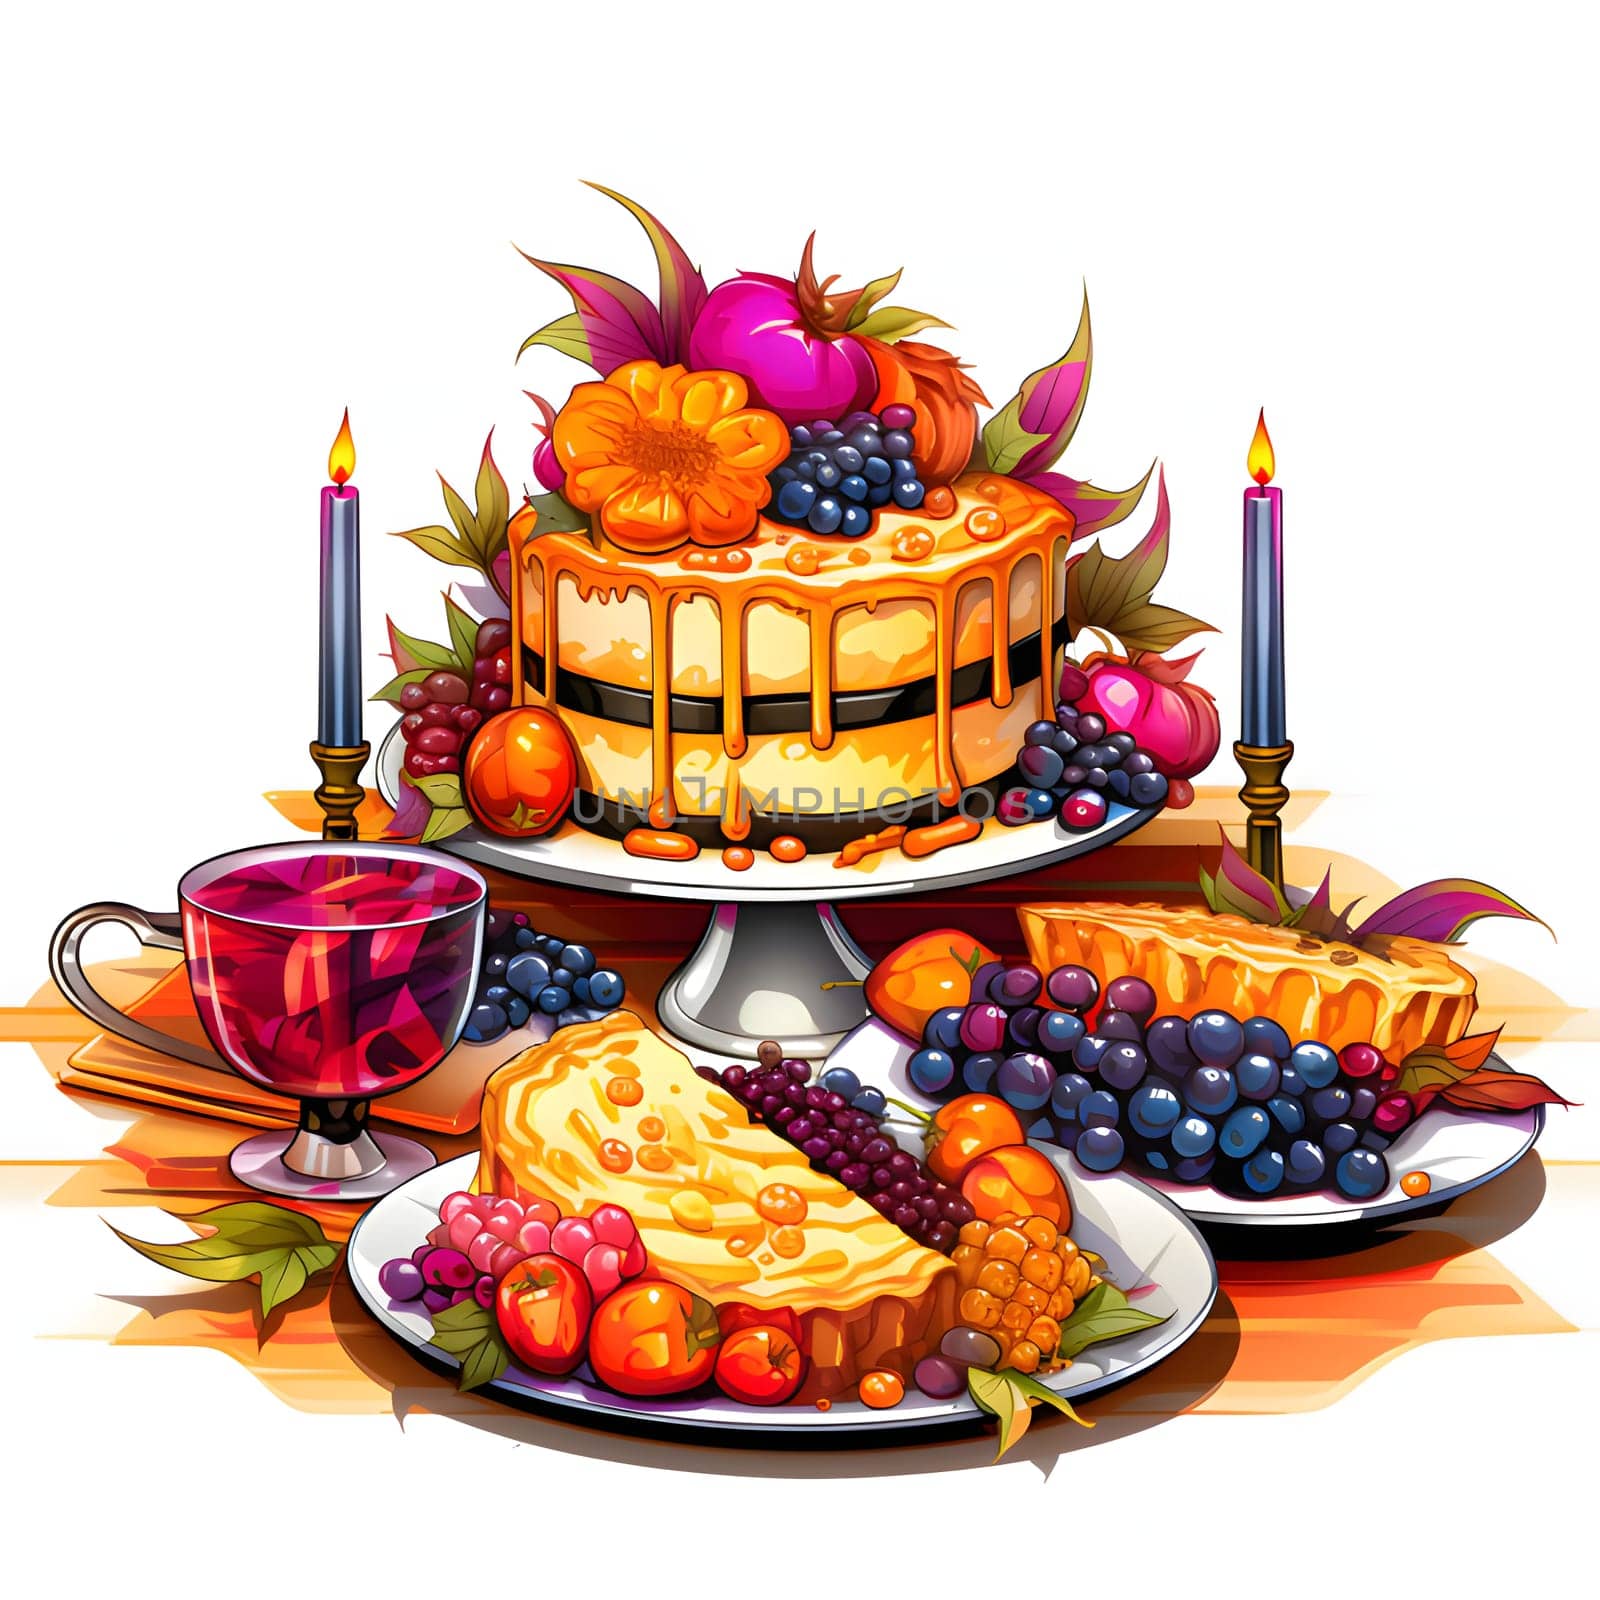 Illustration of colorful pumpkin pies grapes, vegetables, fruits, candles. Pumpkin as a dish of thanksgiving for the harvest, picture on a white isolated background. by ThemesS